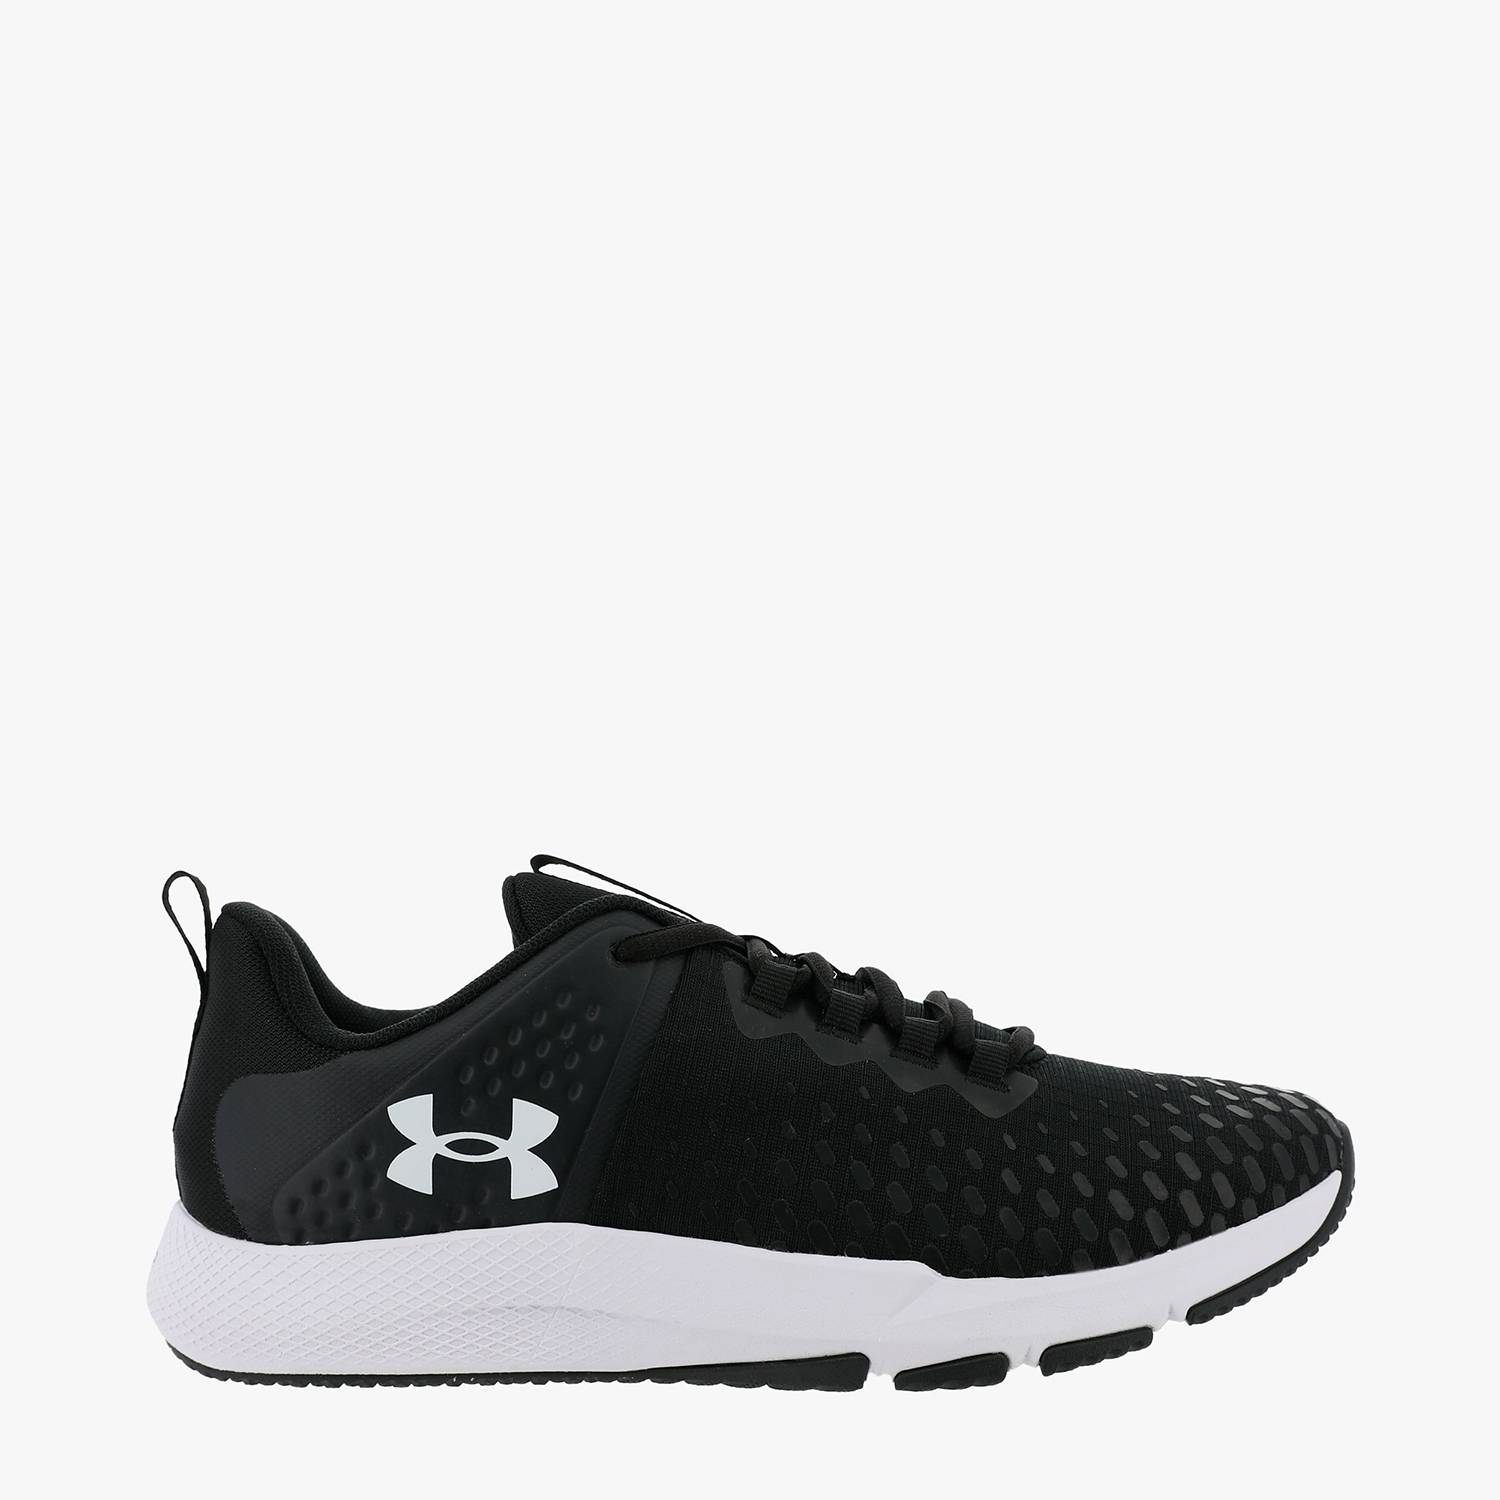 Zapatillas Cross training Hombre Charge Bnd Negro Under Armour UNDER ARMOUR